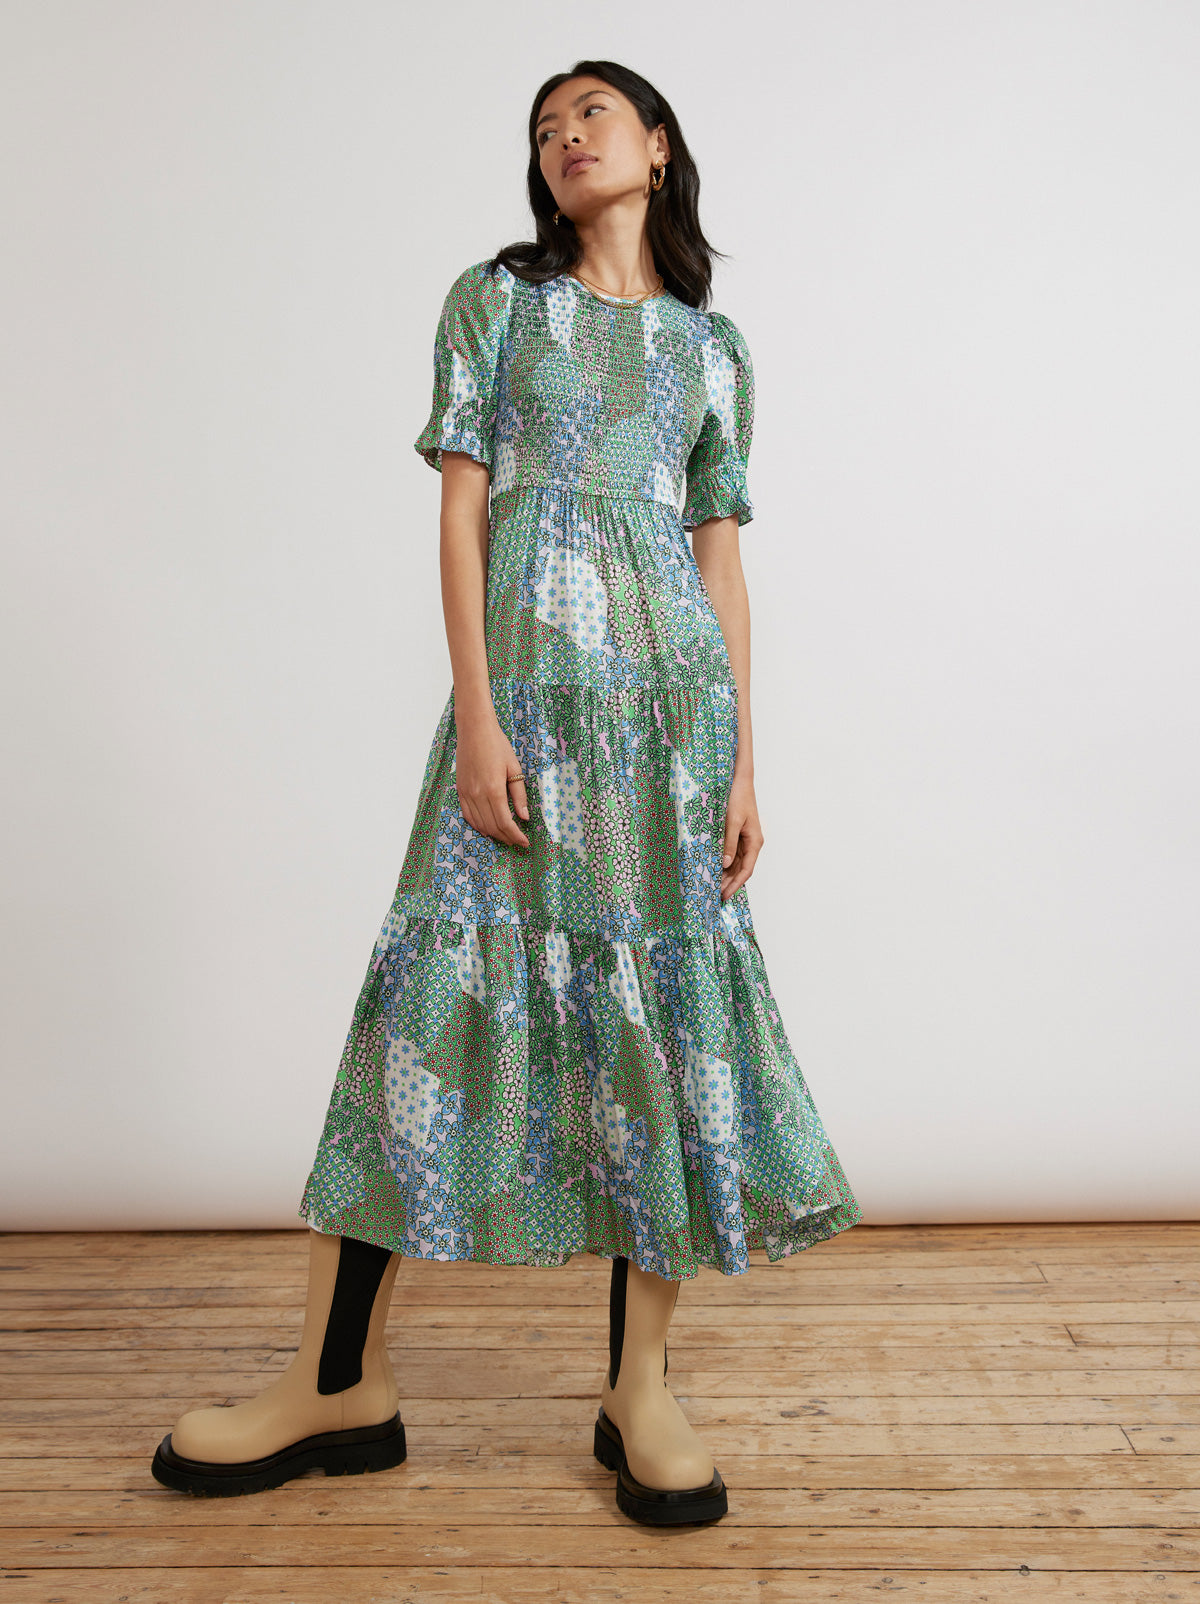 Persephone Shirred Mixed Floral Print Dress